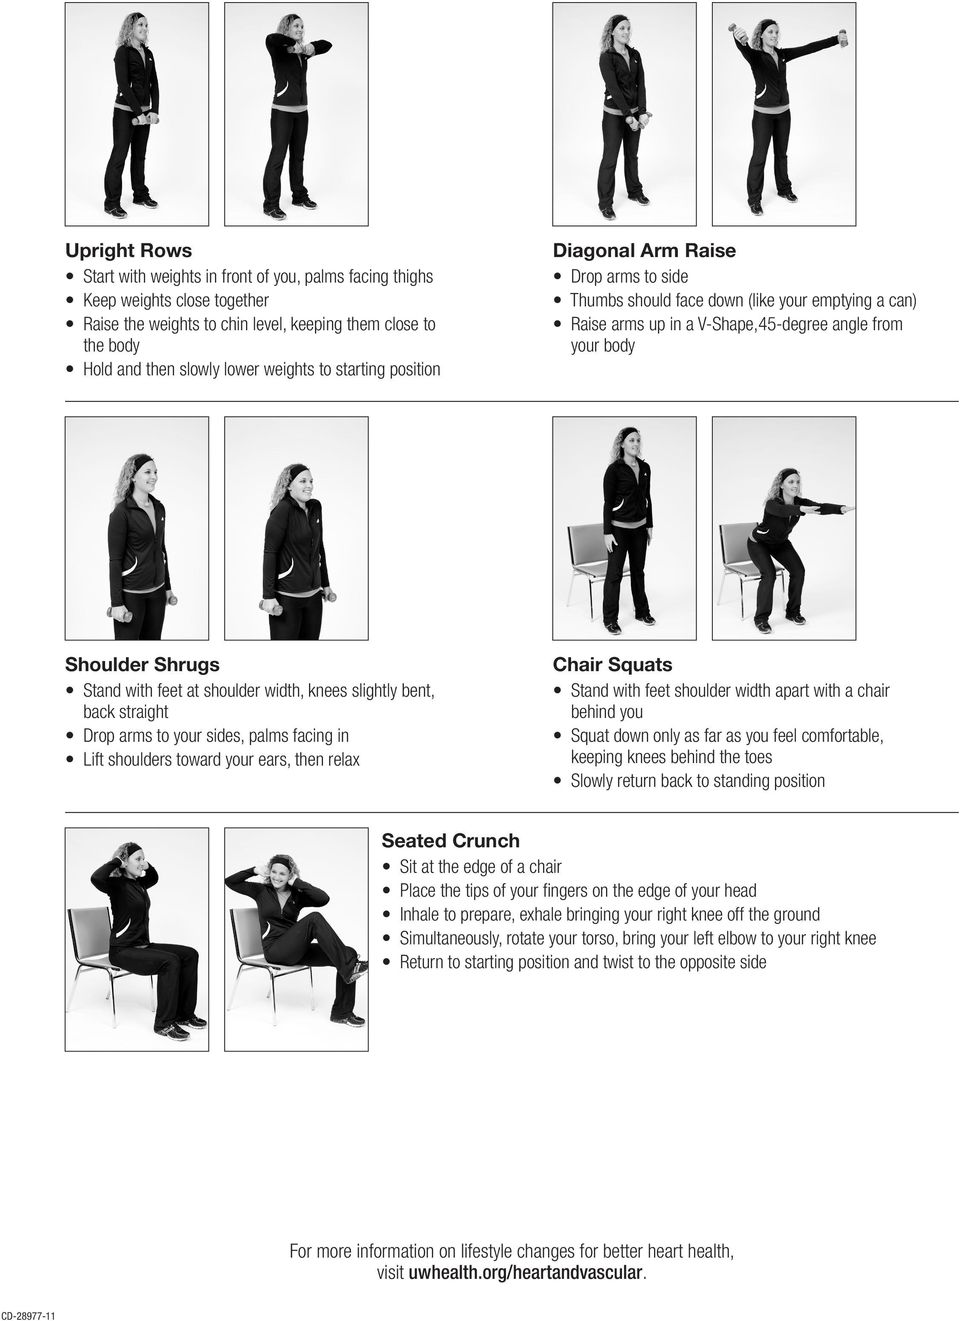 shoulder width, knees slightly bent, back straight Drop arms to your sides, palms facing in Lift shoulders toward your ears, then relax Chair Squats Stand with feet shoulder width apart with a chair